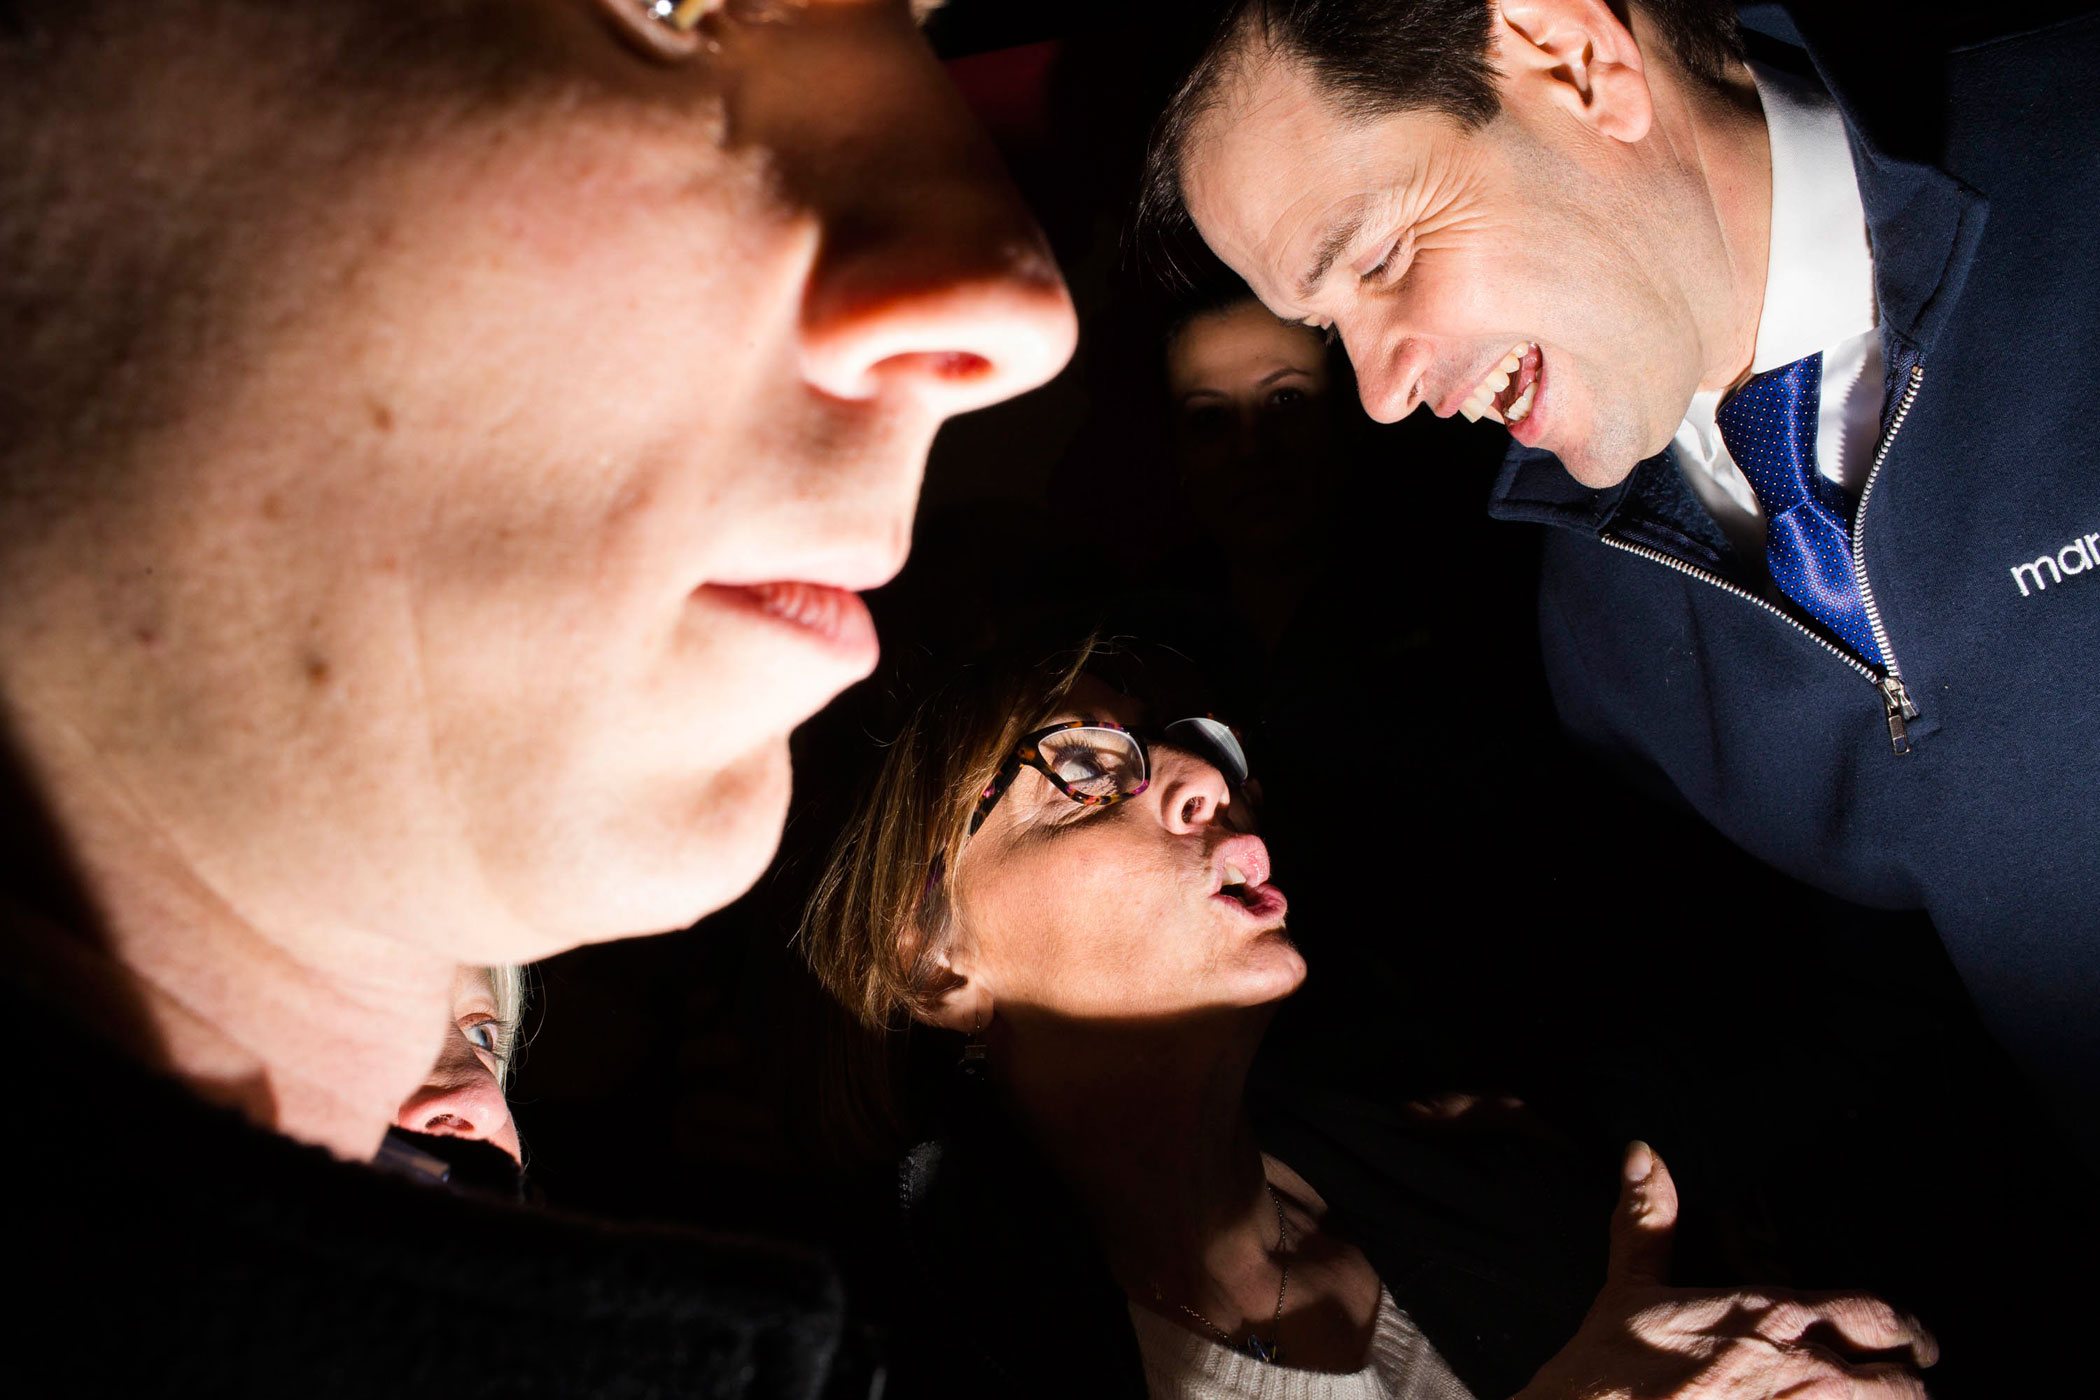 Republican presidential candidate, Florida. Sen. Marco Rubio greets supporters during a campaign event at the Allard Center on Feb. 7, 2016, in Manchester, N.H.